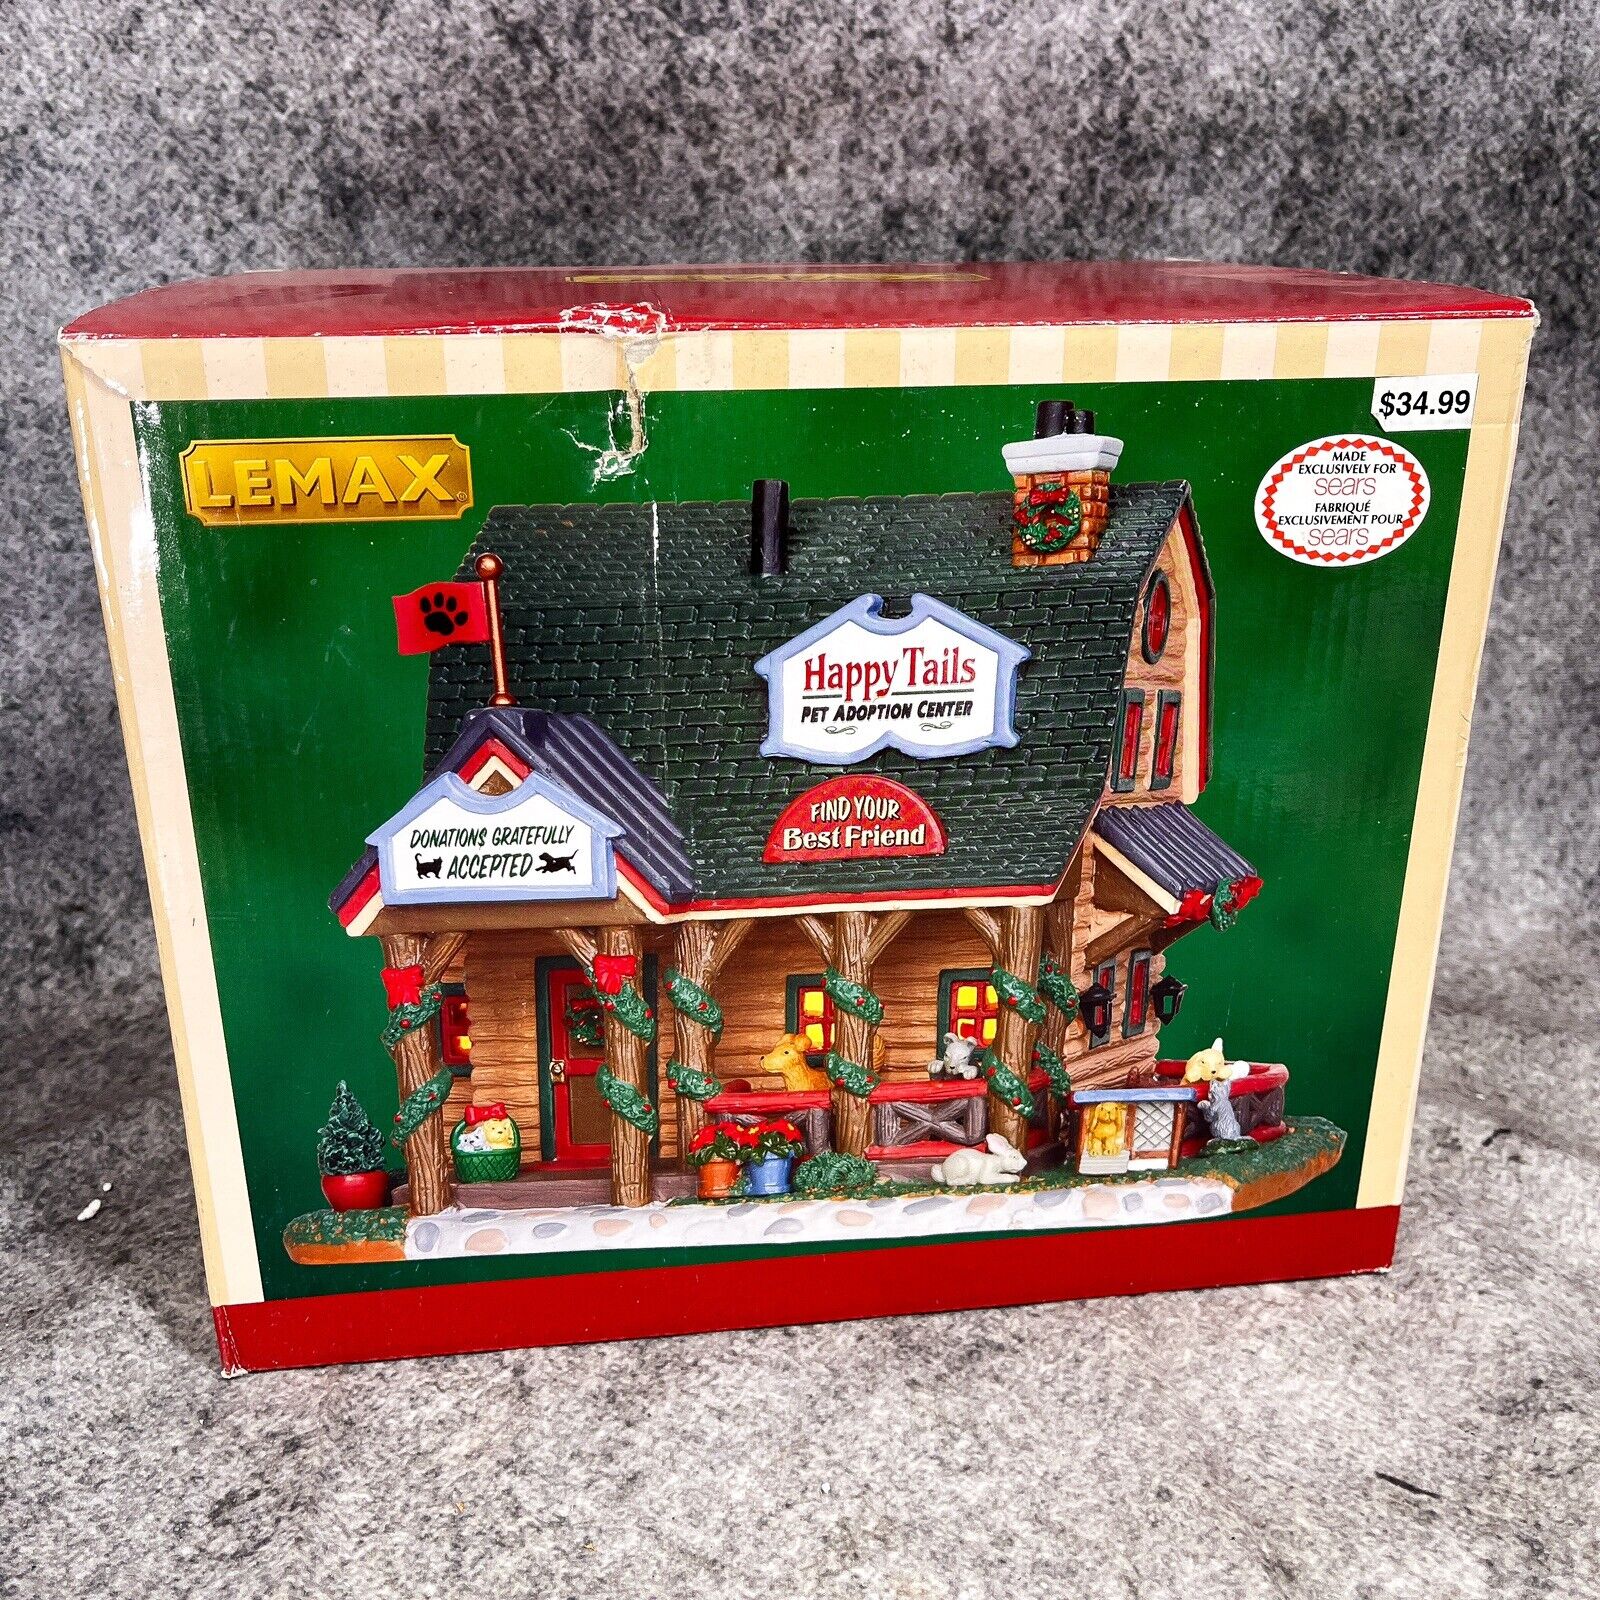 Lemax Happy Tails Pet Adoption Center Sears Exclusive Lighted Christmas Village